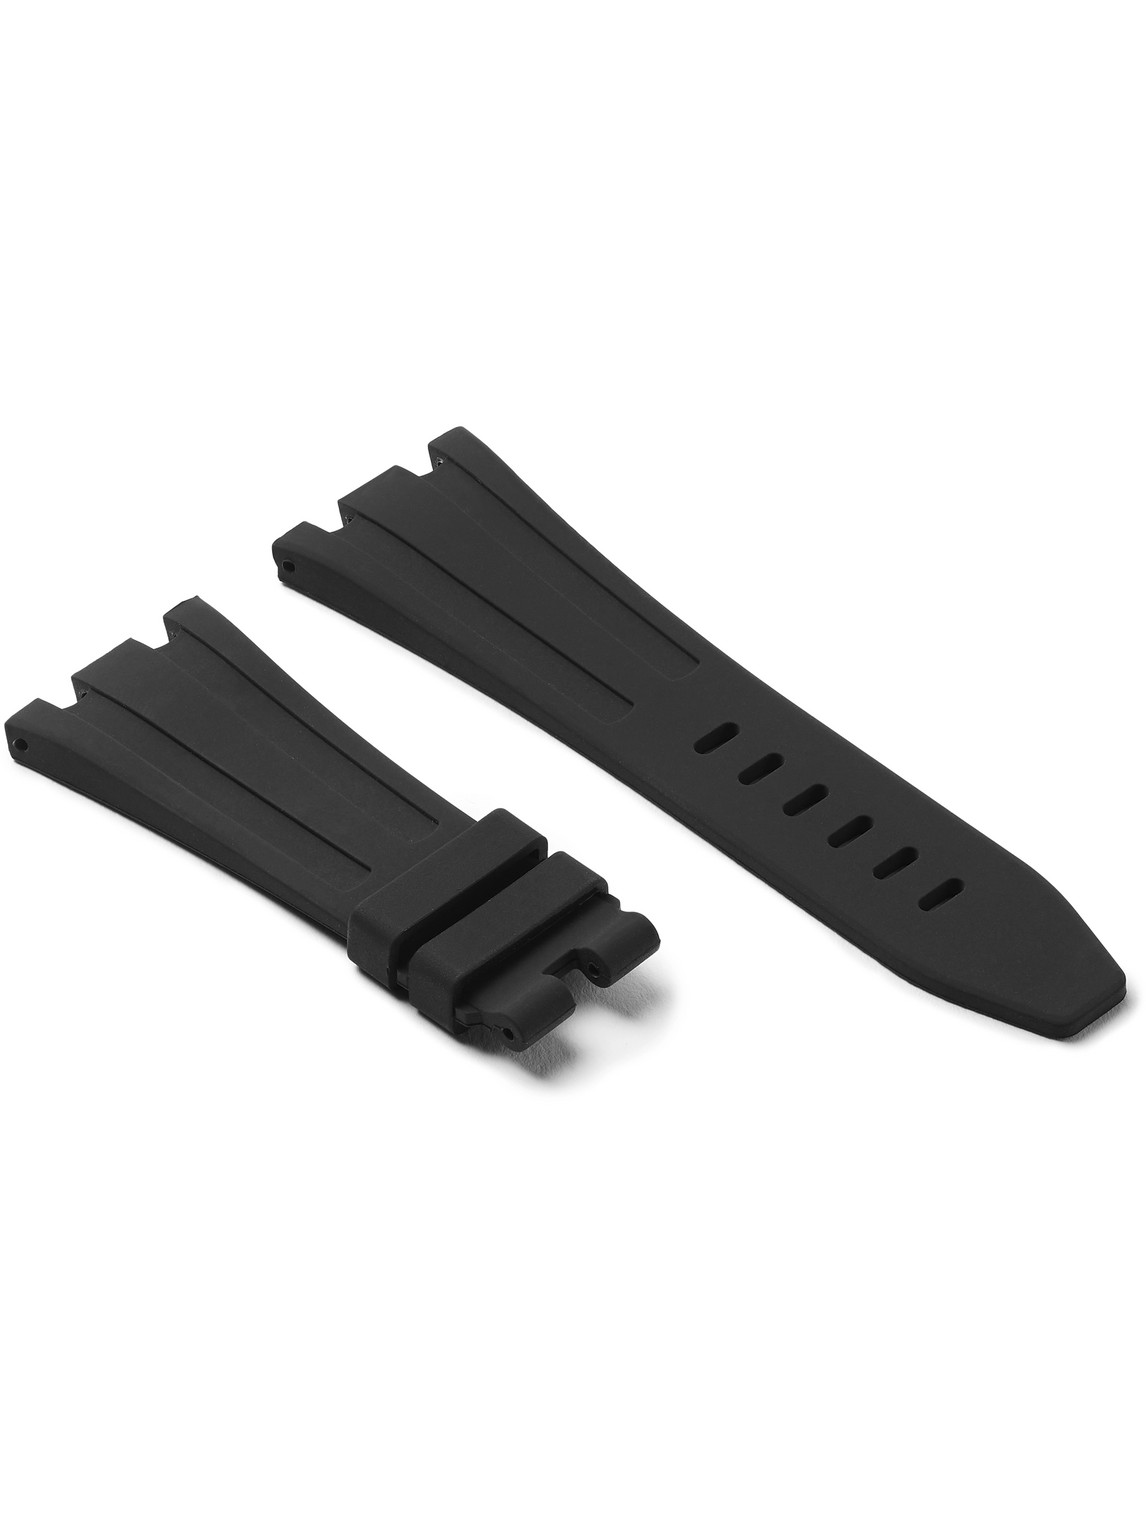 Horus Watch Straps Tang 42mm Rubber Watch Strap In Black